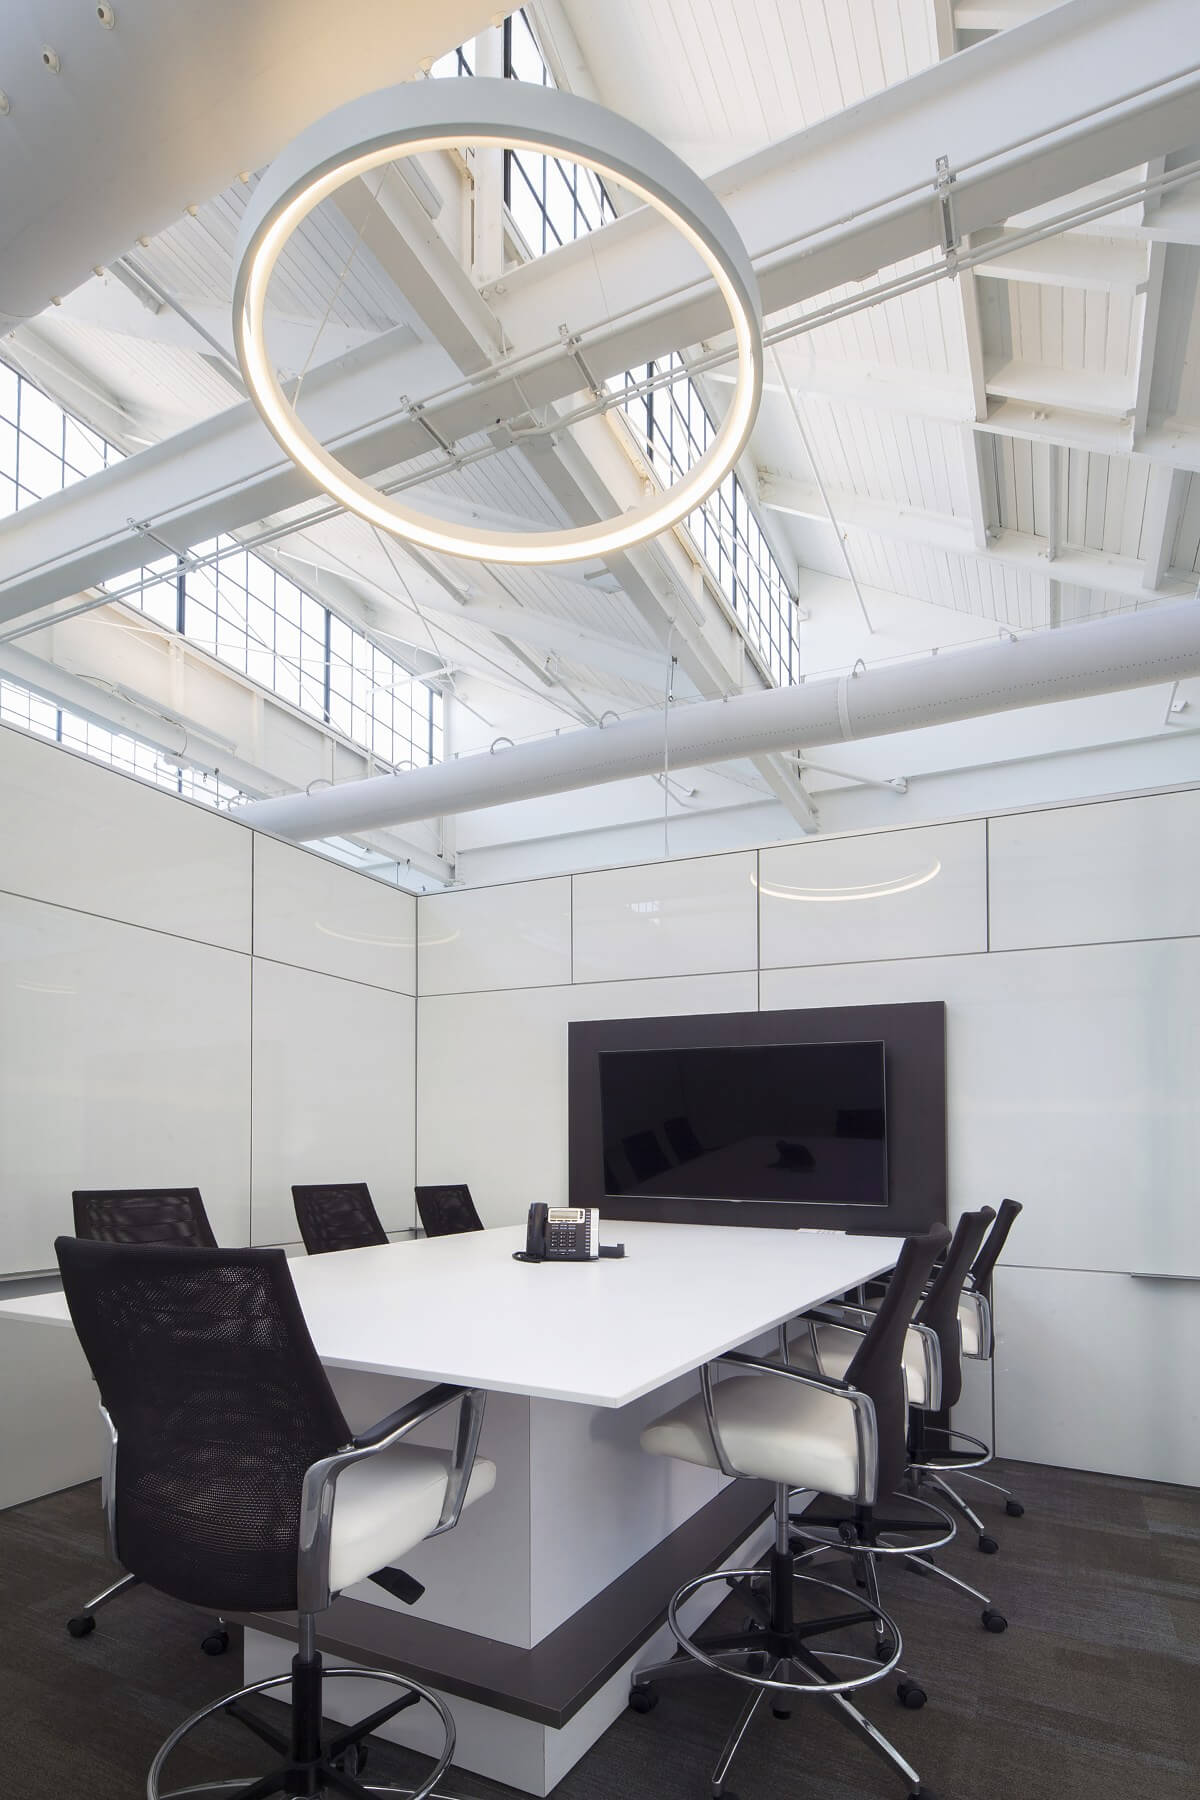 Unique circular lighting makes a simple yet stunning statement in this one-of-a-kind conference room Image Mason Fischer